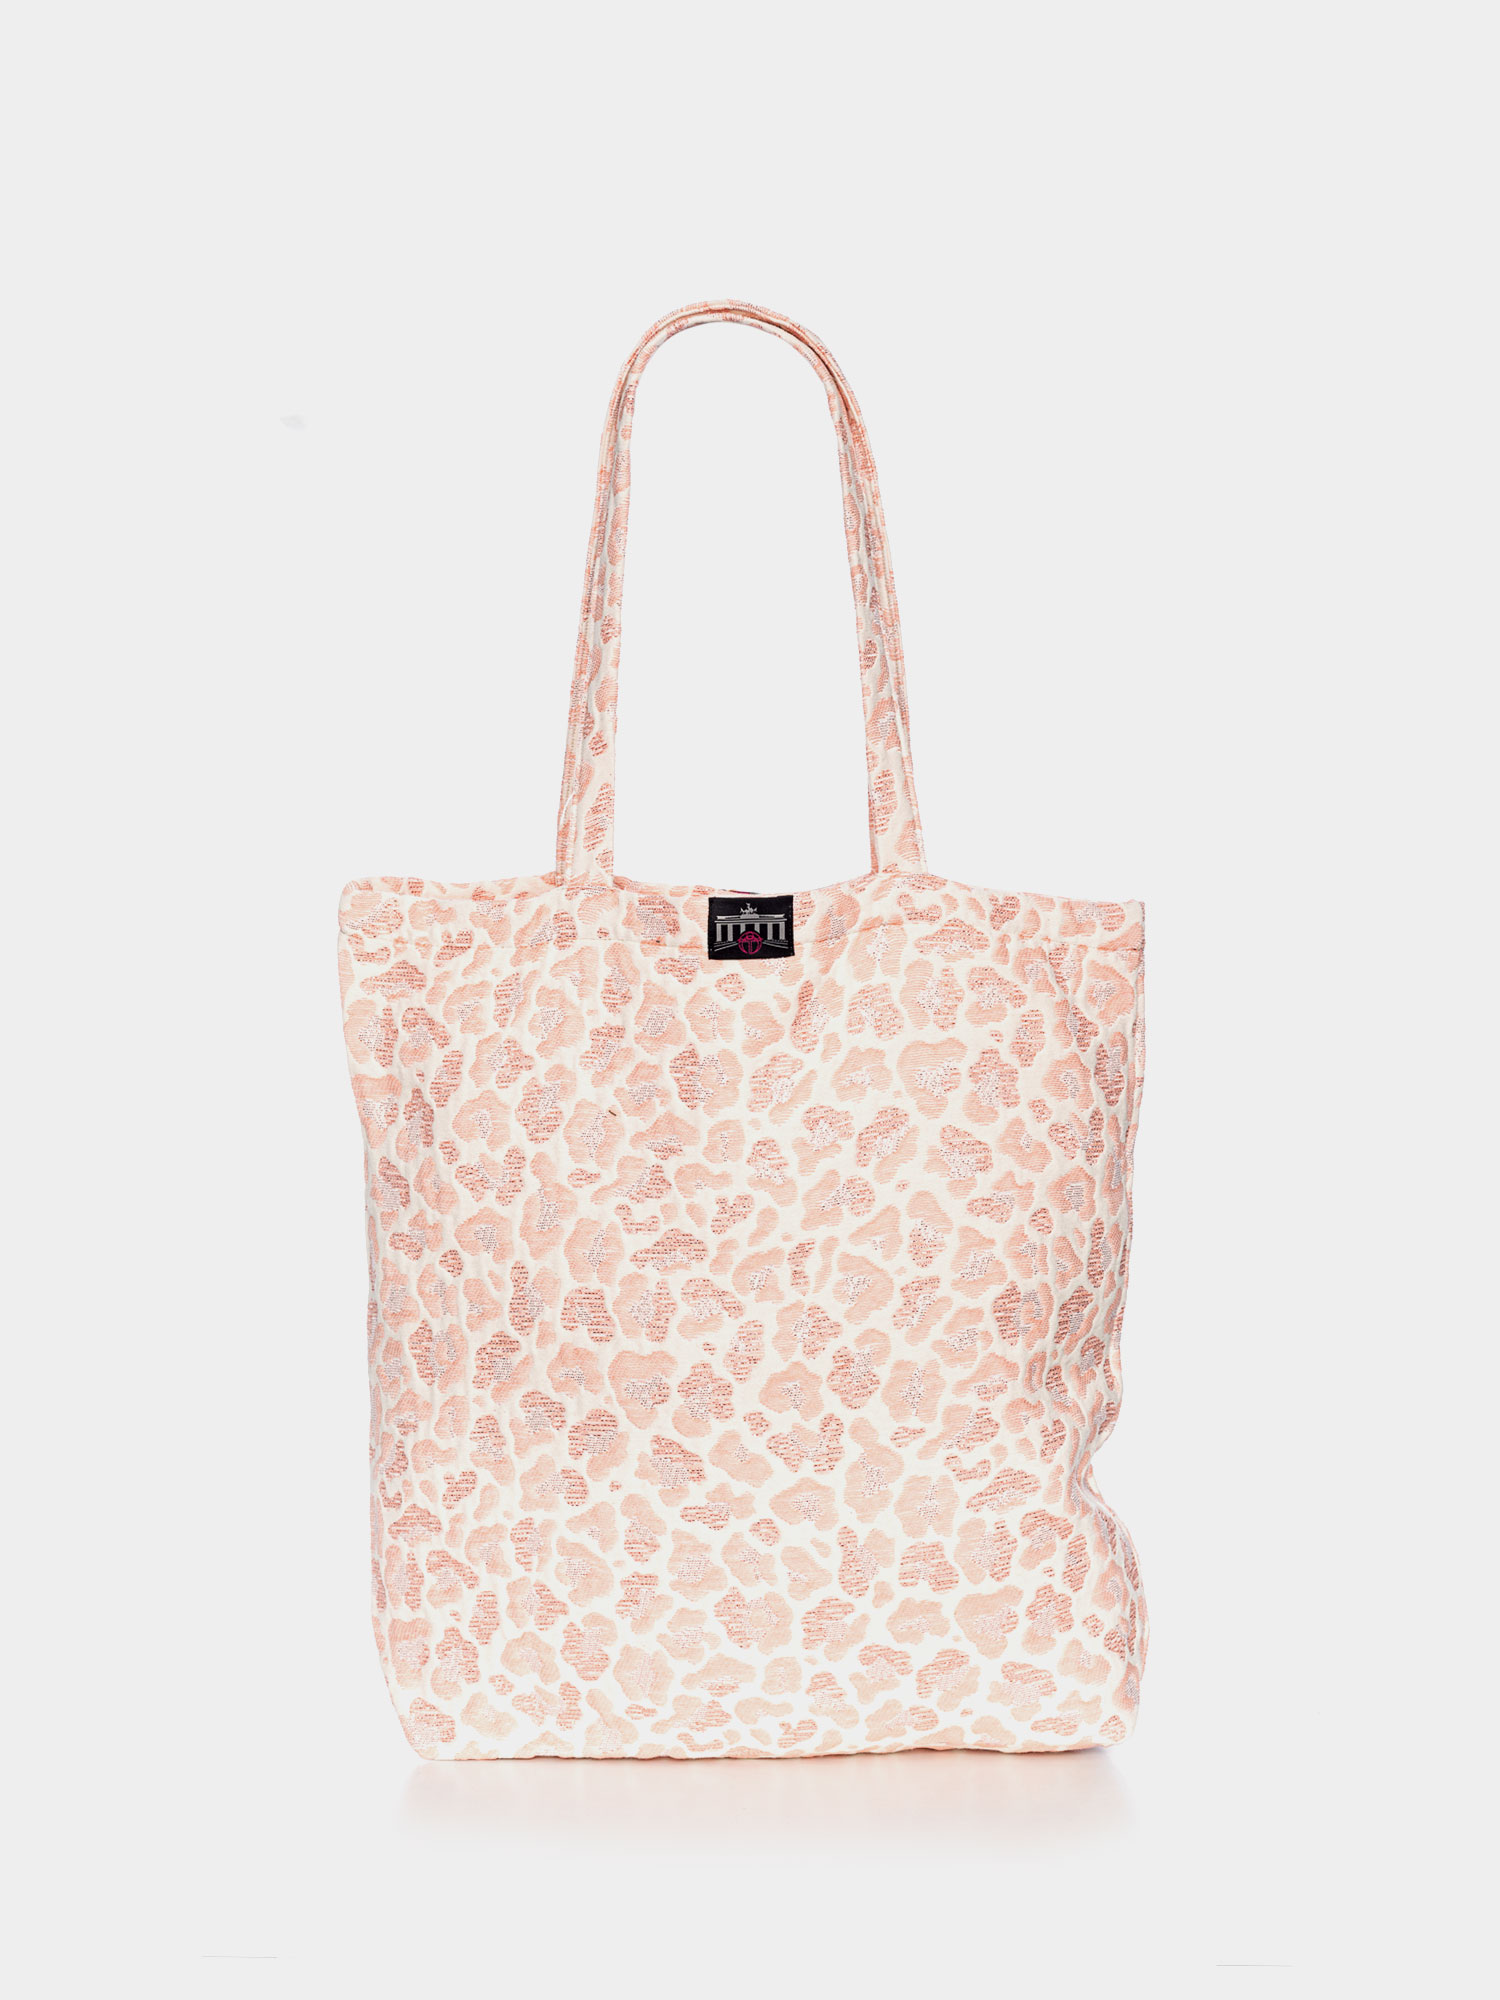 Tasche Jimmys S PES/CO 02/000 ROSE/WHT 27058